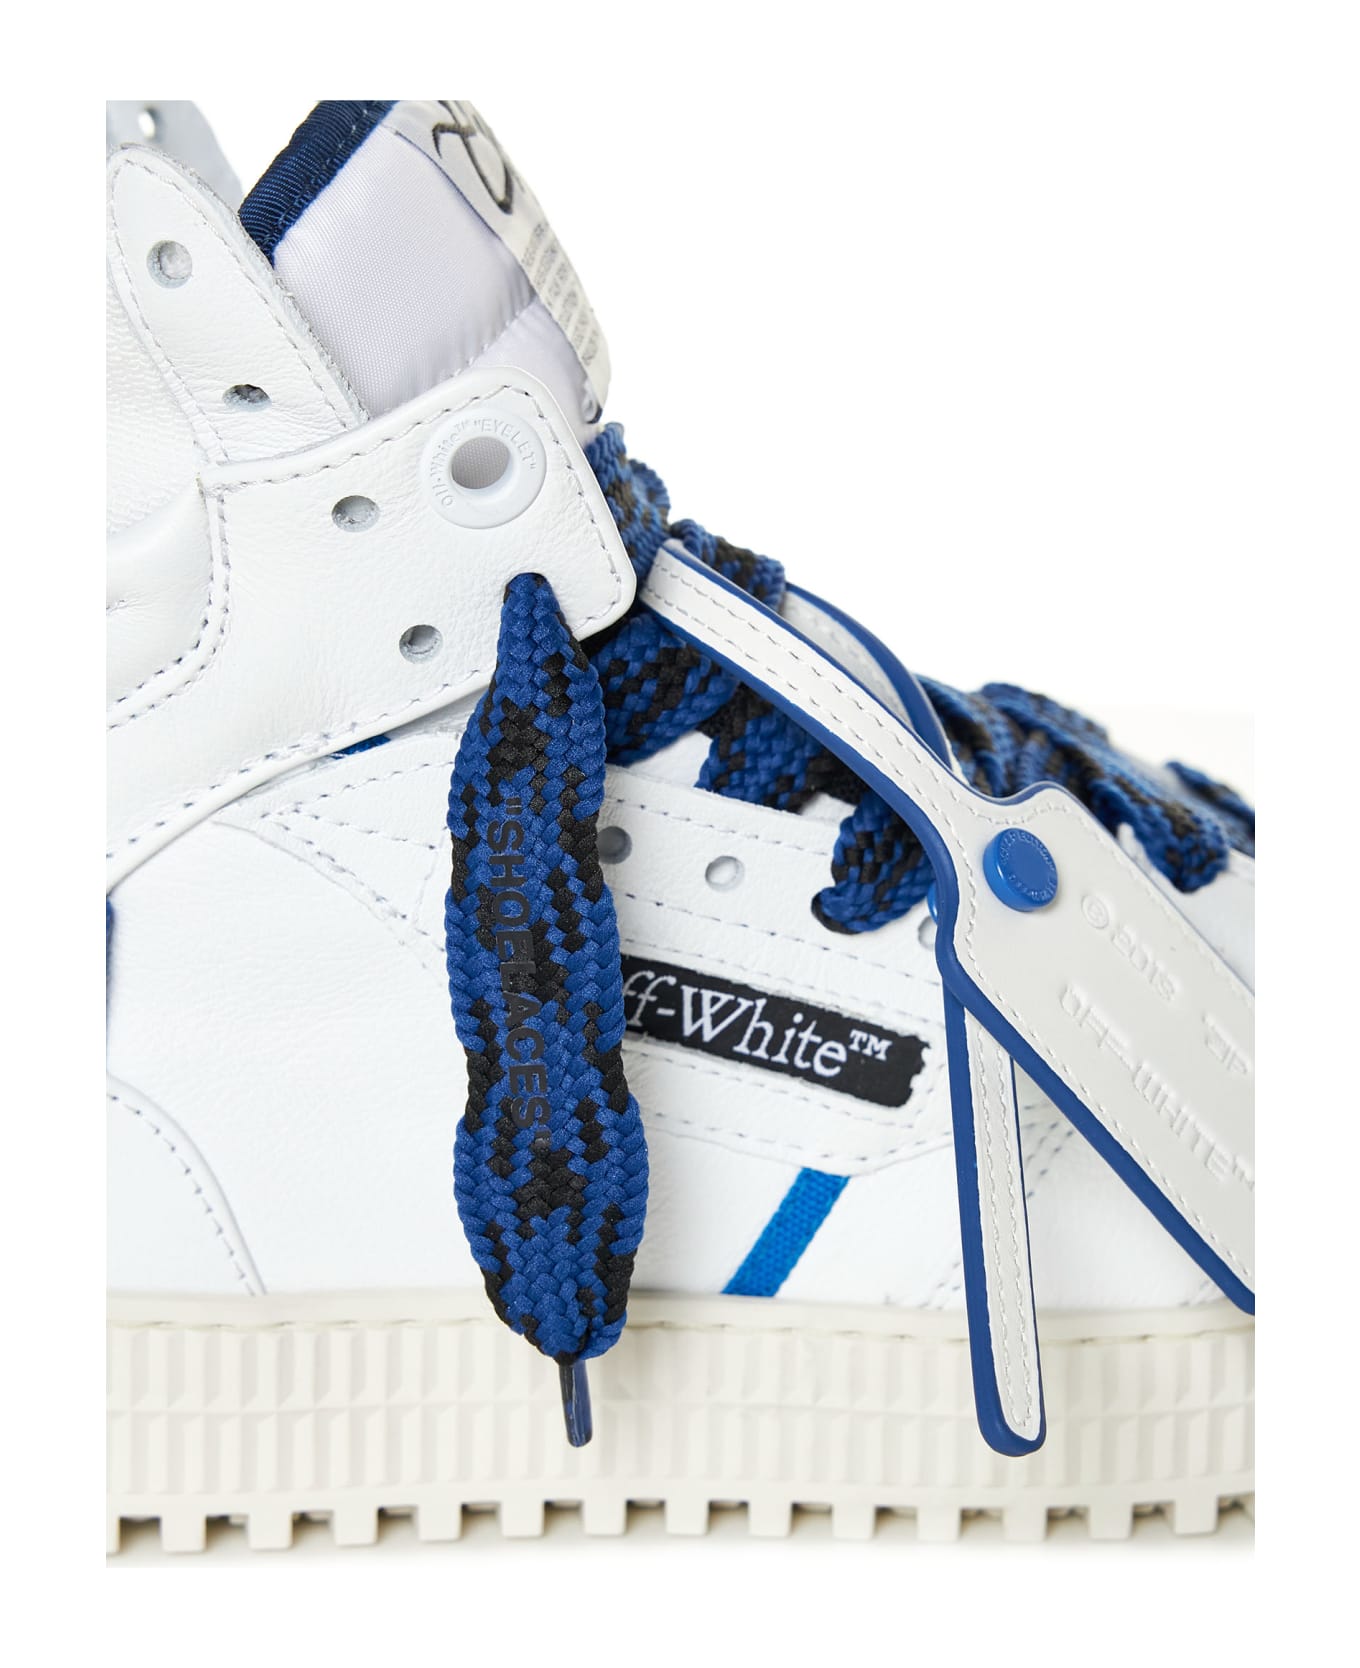 Off-White Sneakers - White navy blue